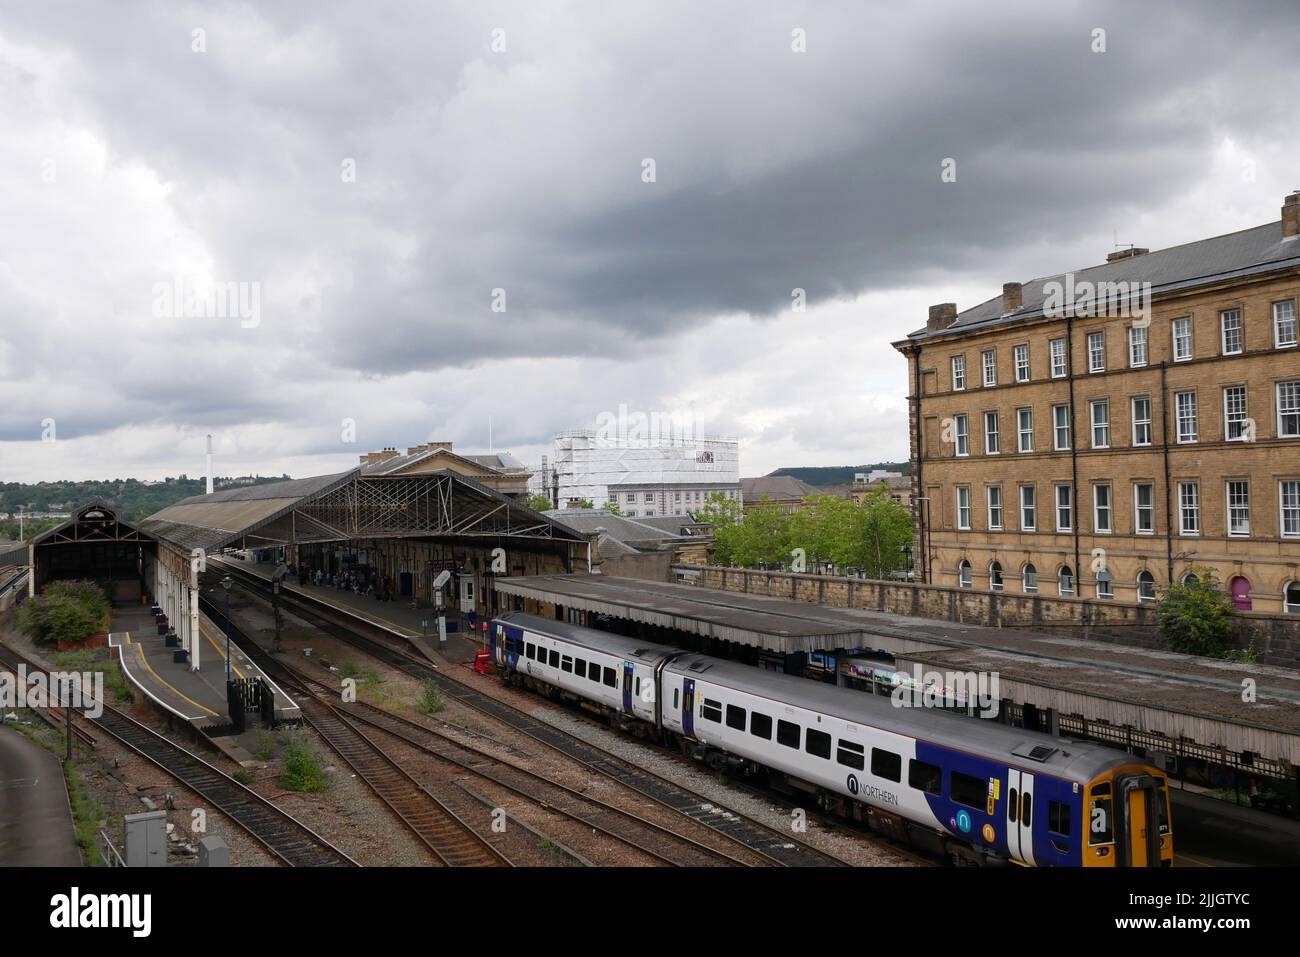 Silver and blue two carriage northern railway train parked in station other lines and buildings cloudy sky Stock Photo